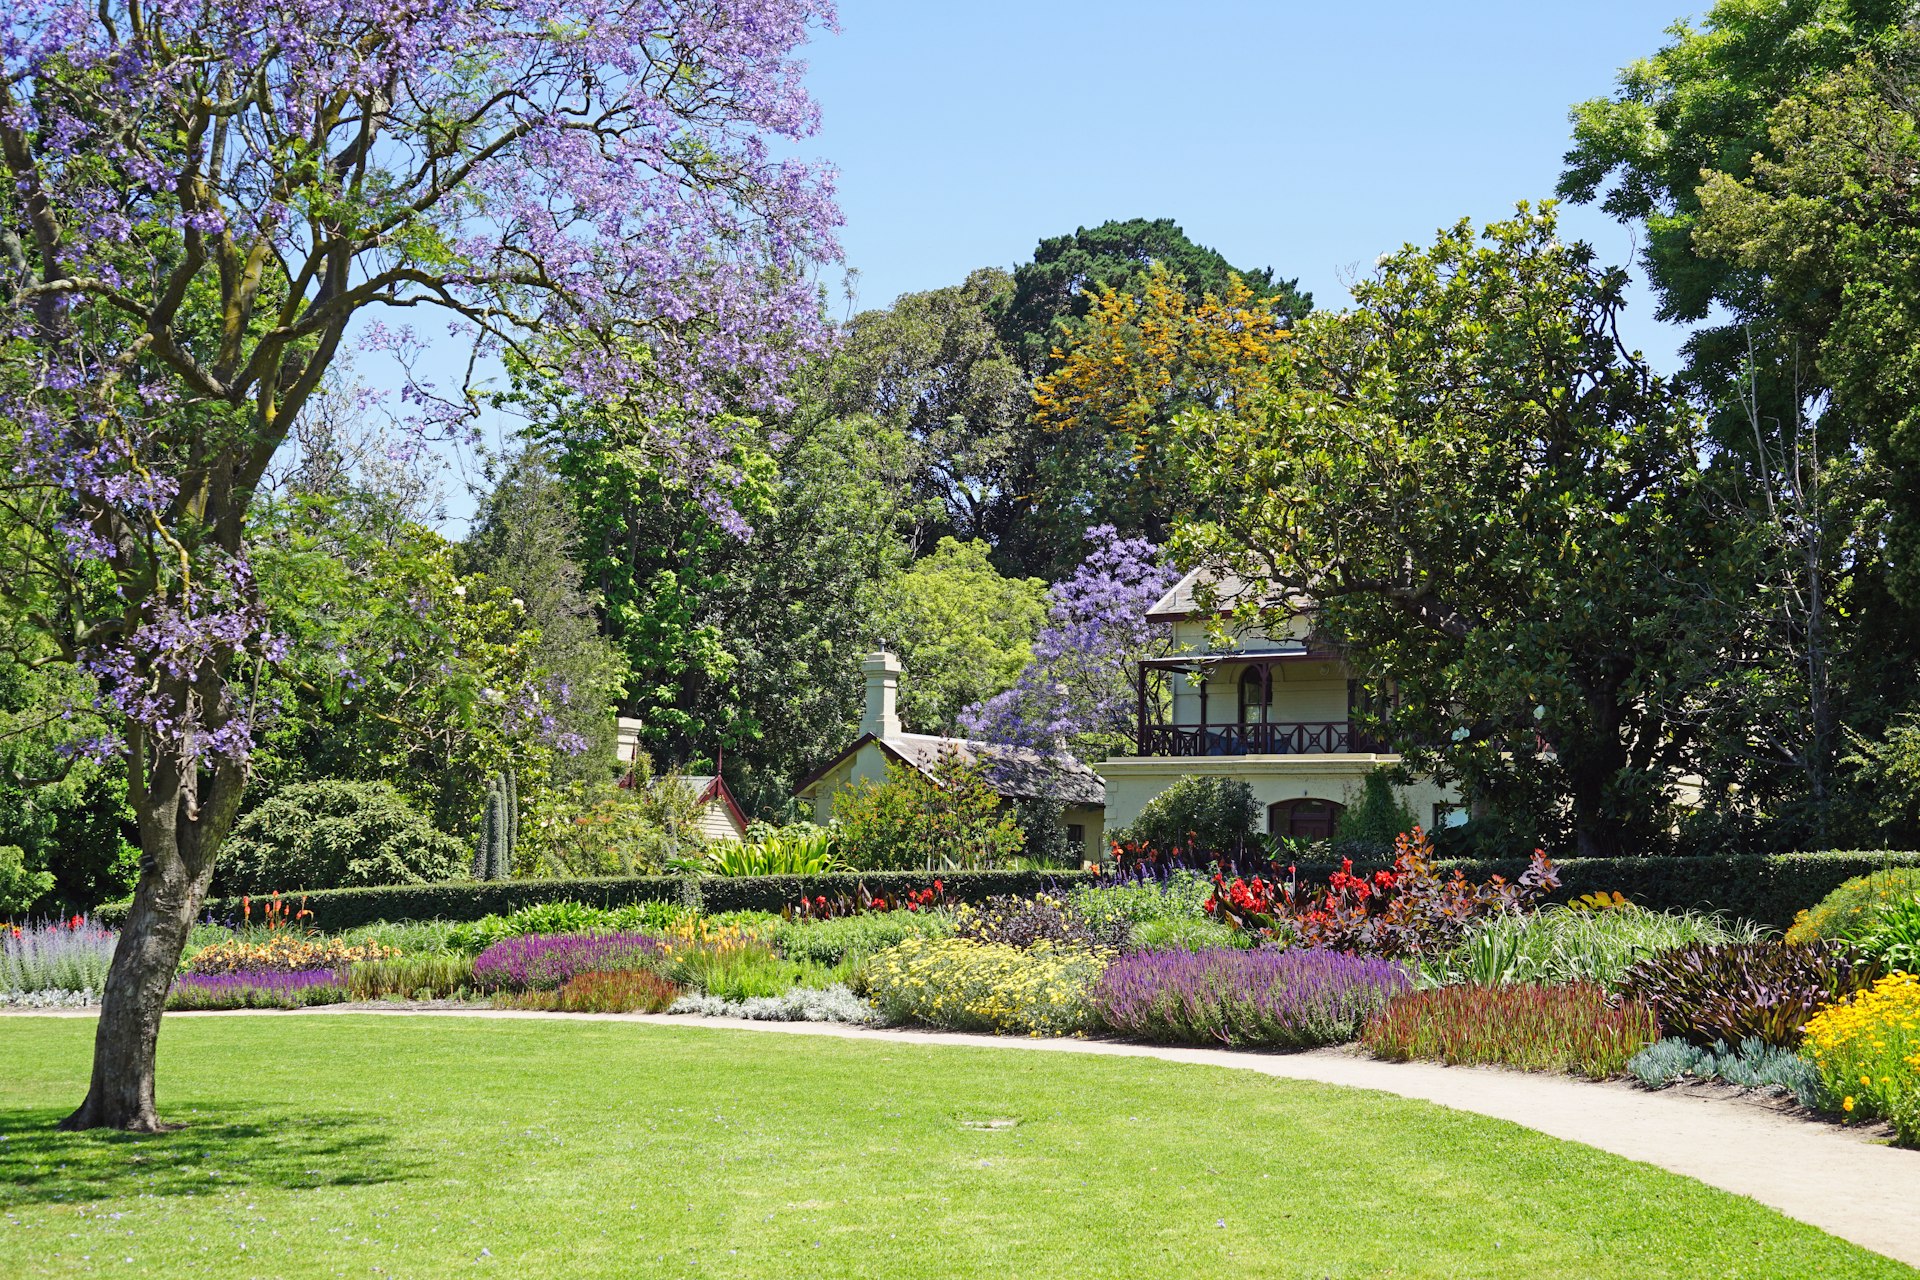 A view of a section of the Royal Botanic Gardens in Melbourne. A patch of green lawn is visible, beyond it are a number of colourful bushes and trees of various shapes and sizes.